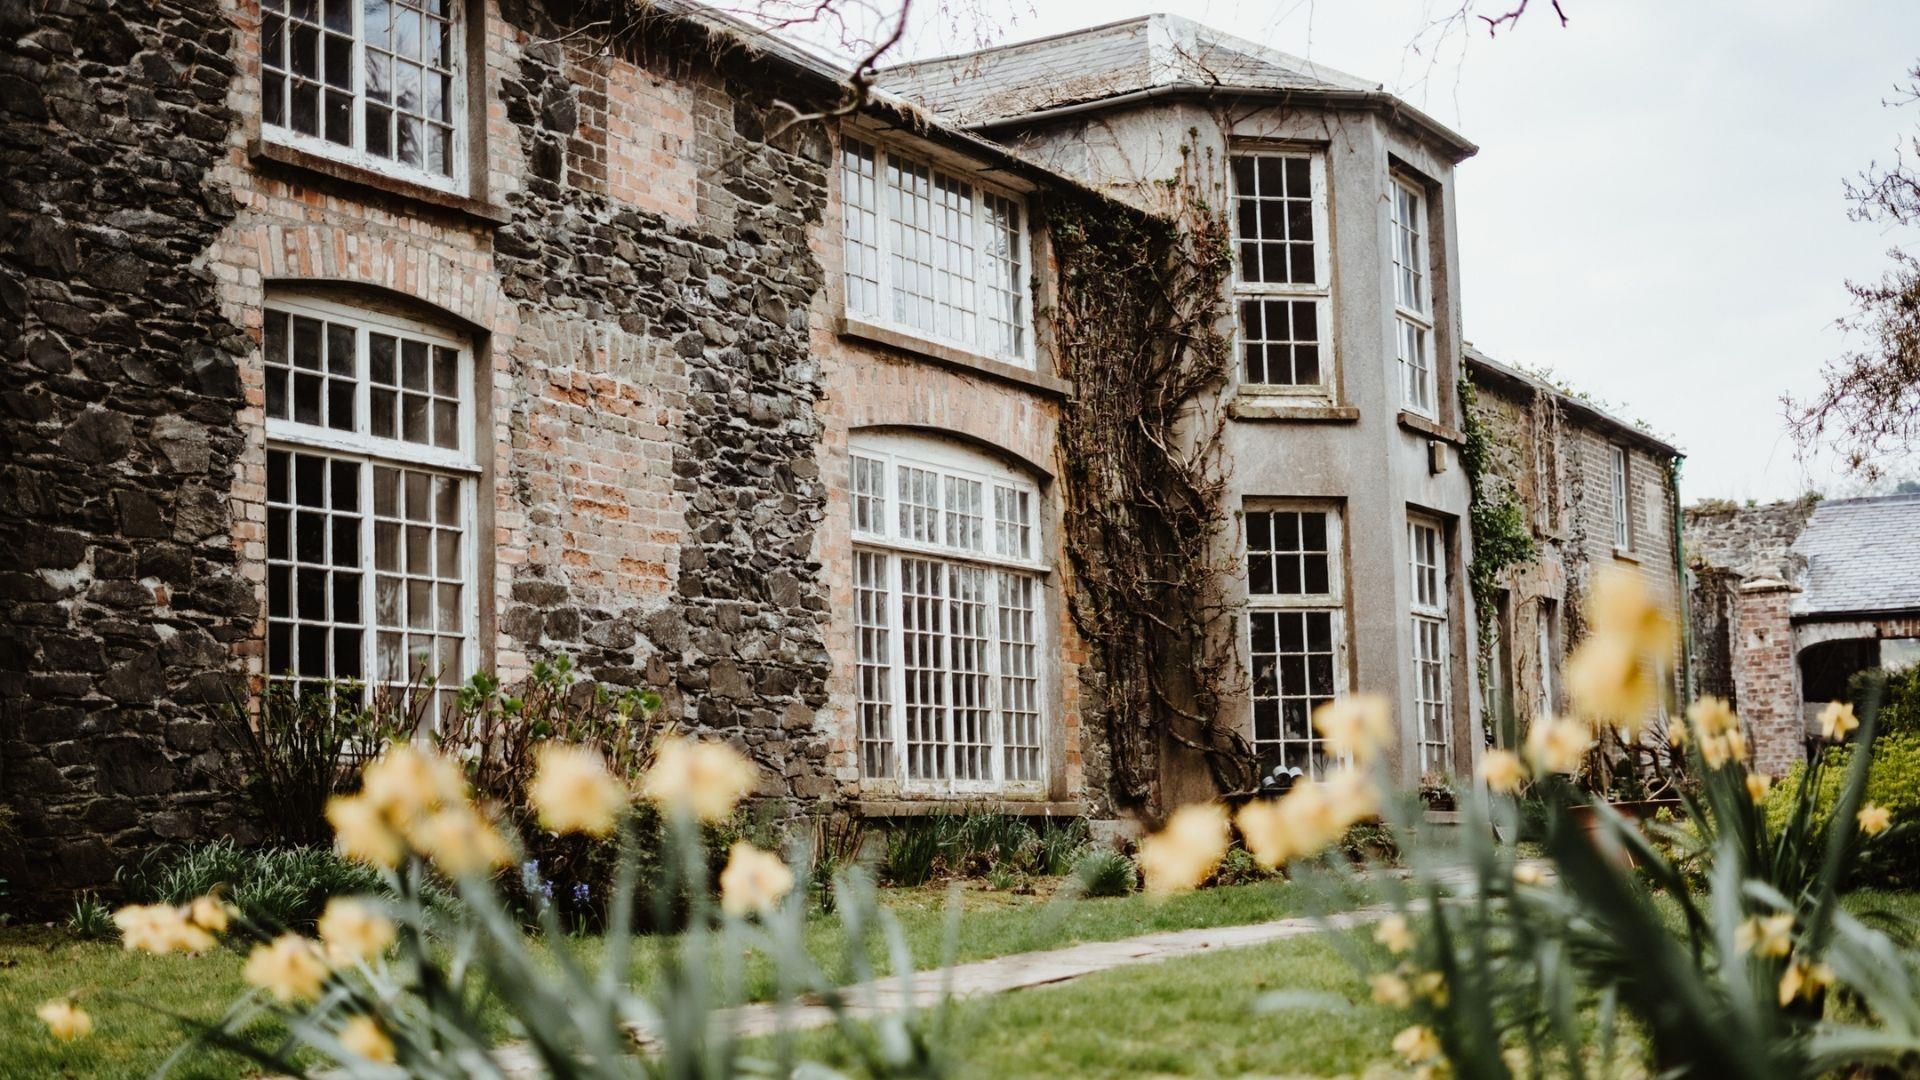 a photo of the house in the walled garden